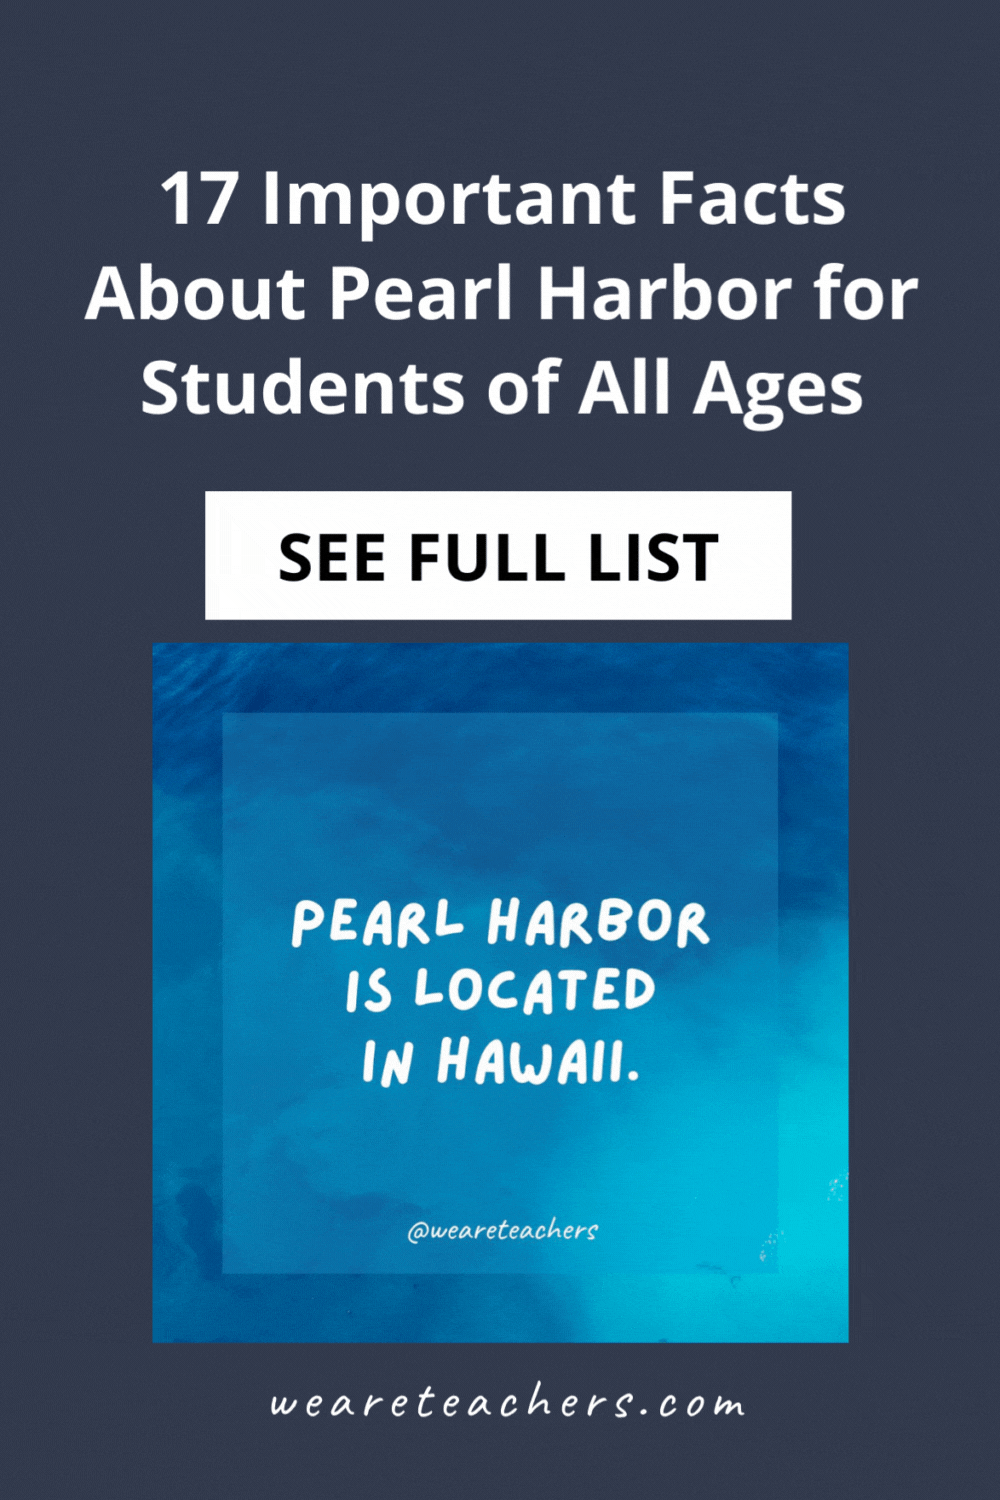 Pearl Harbor Day is on December 7. Here's a list of important Pearl Harbor facts to share with students in your classroom.